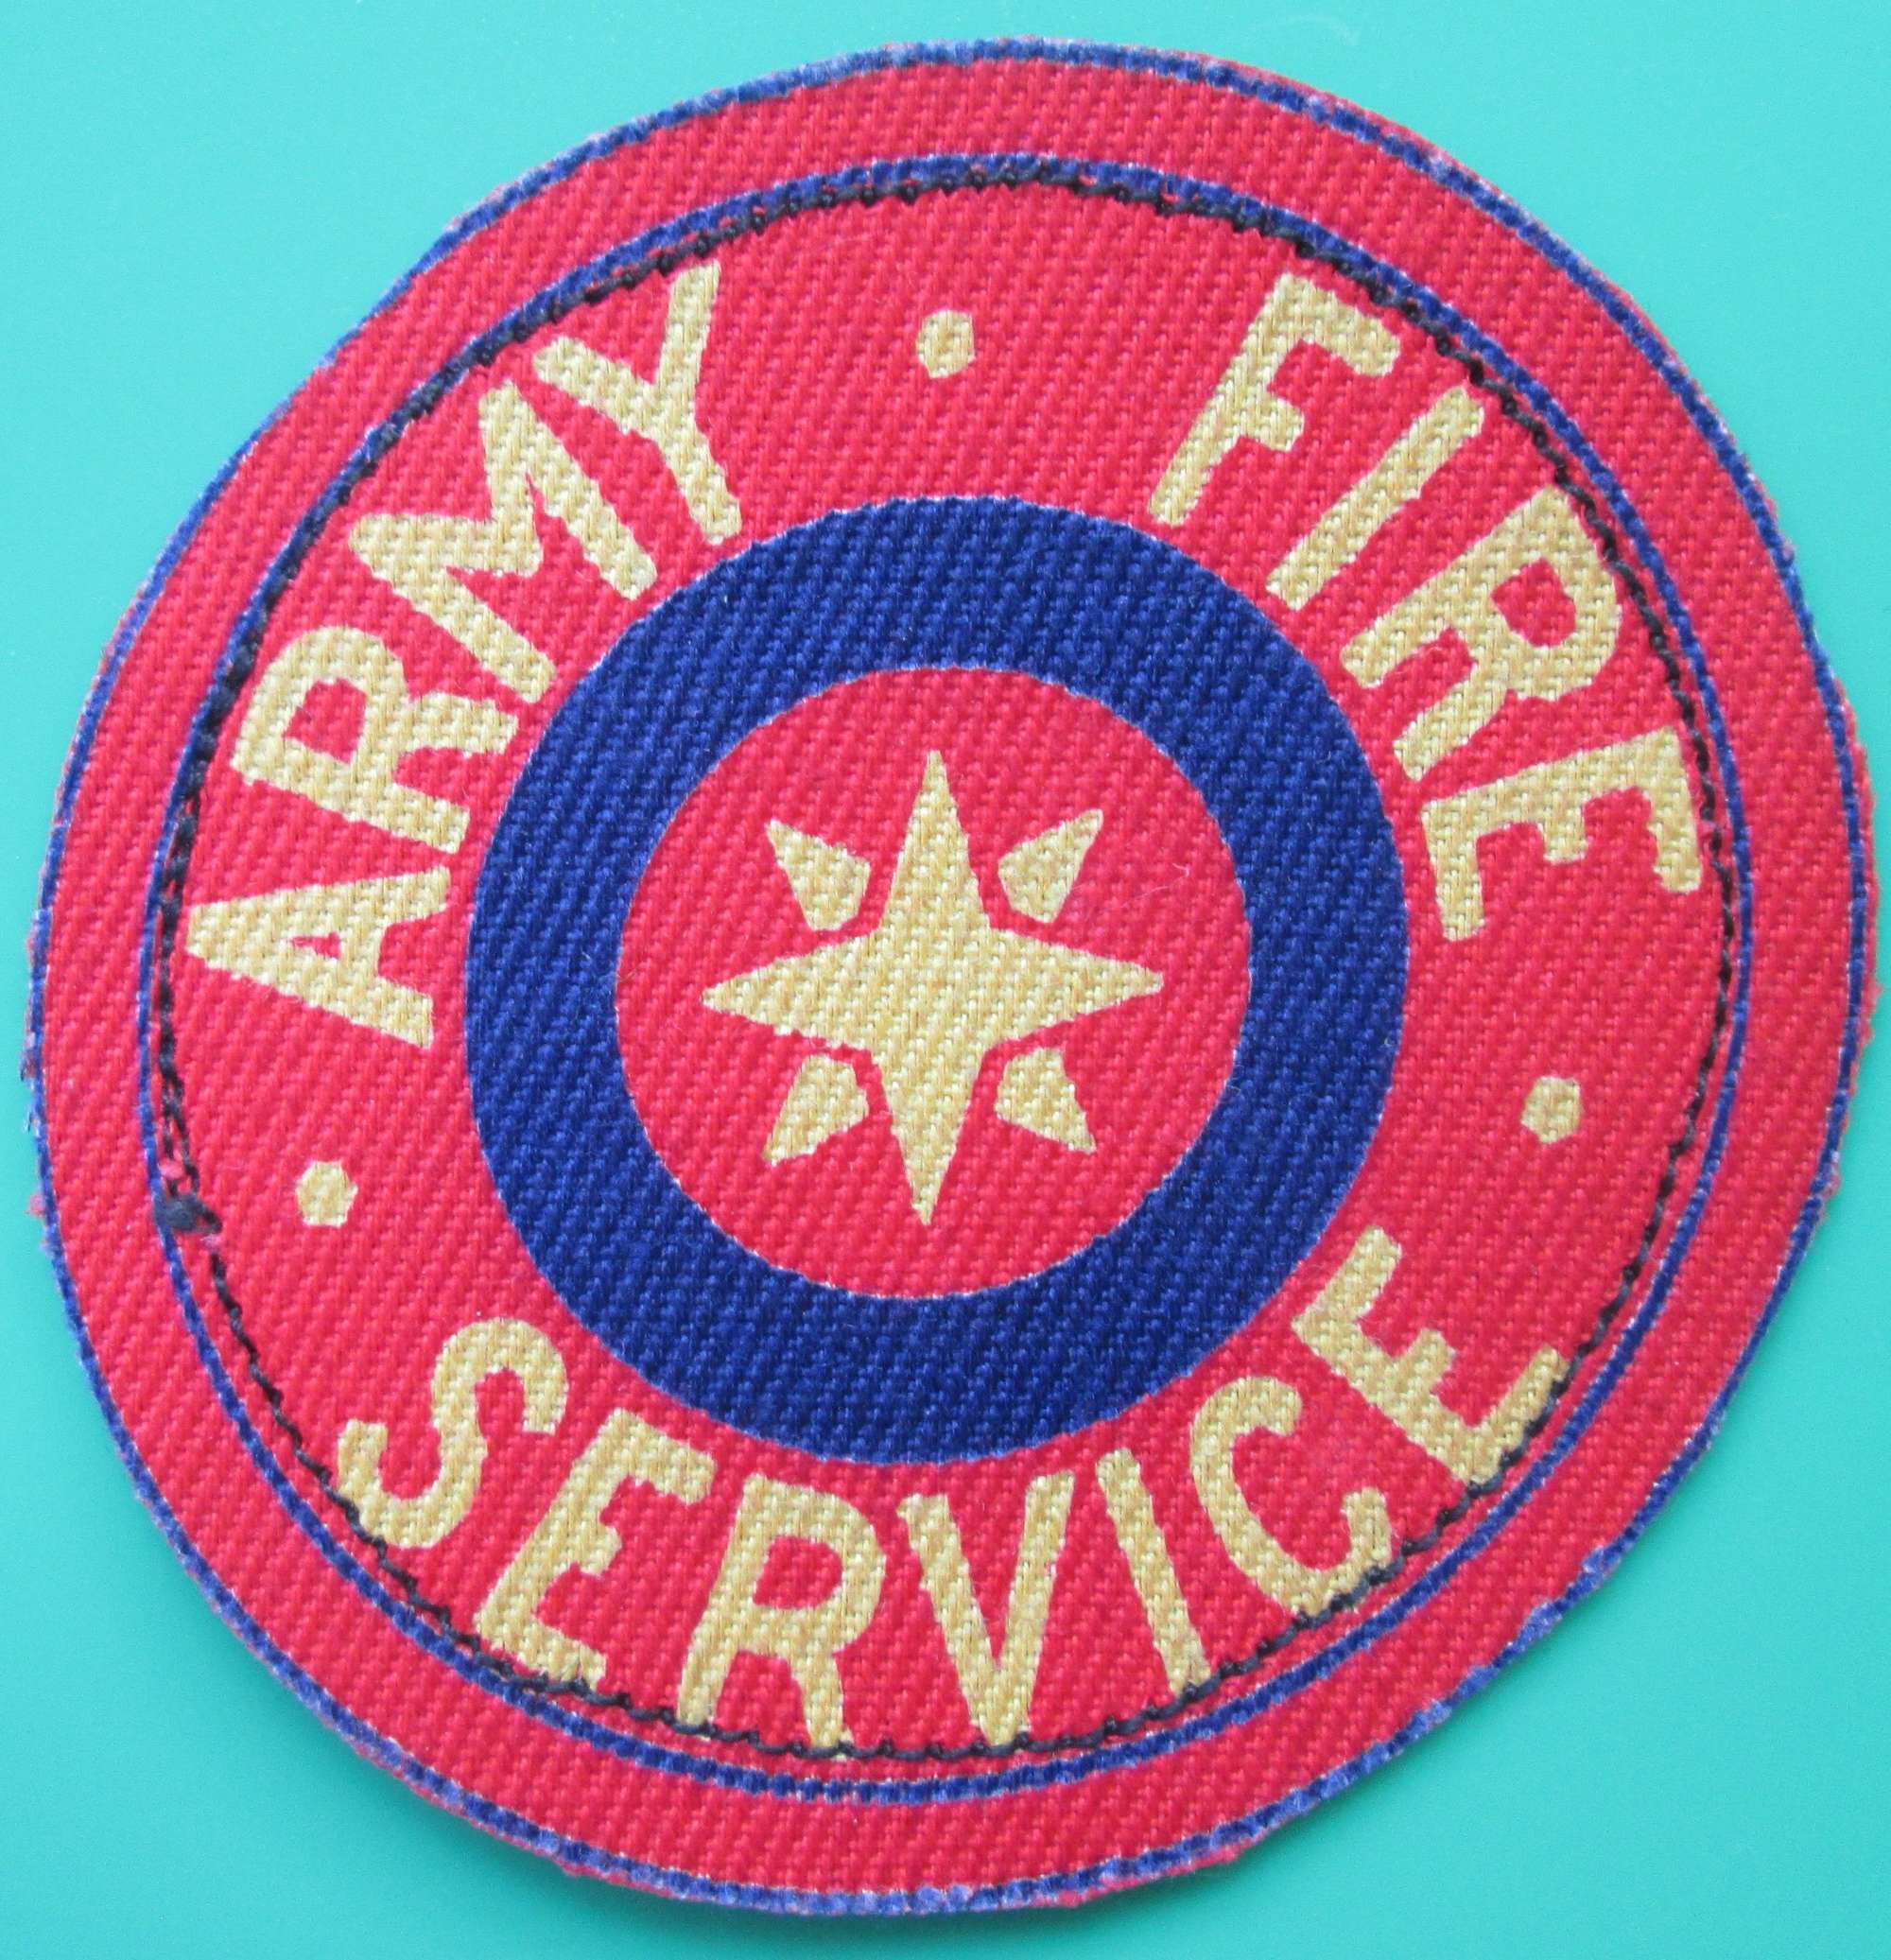 AN ARMY FIRE SERVICE PATCH